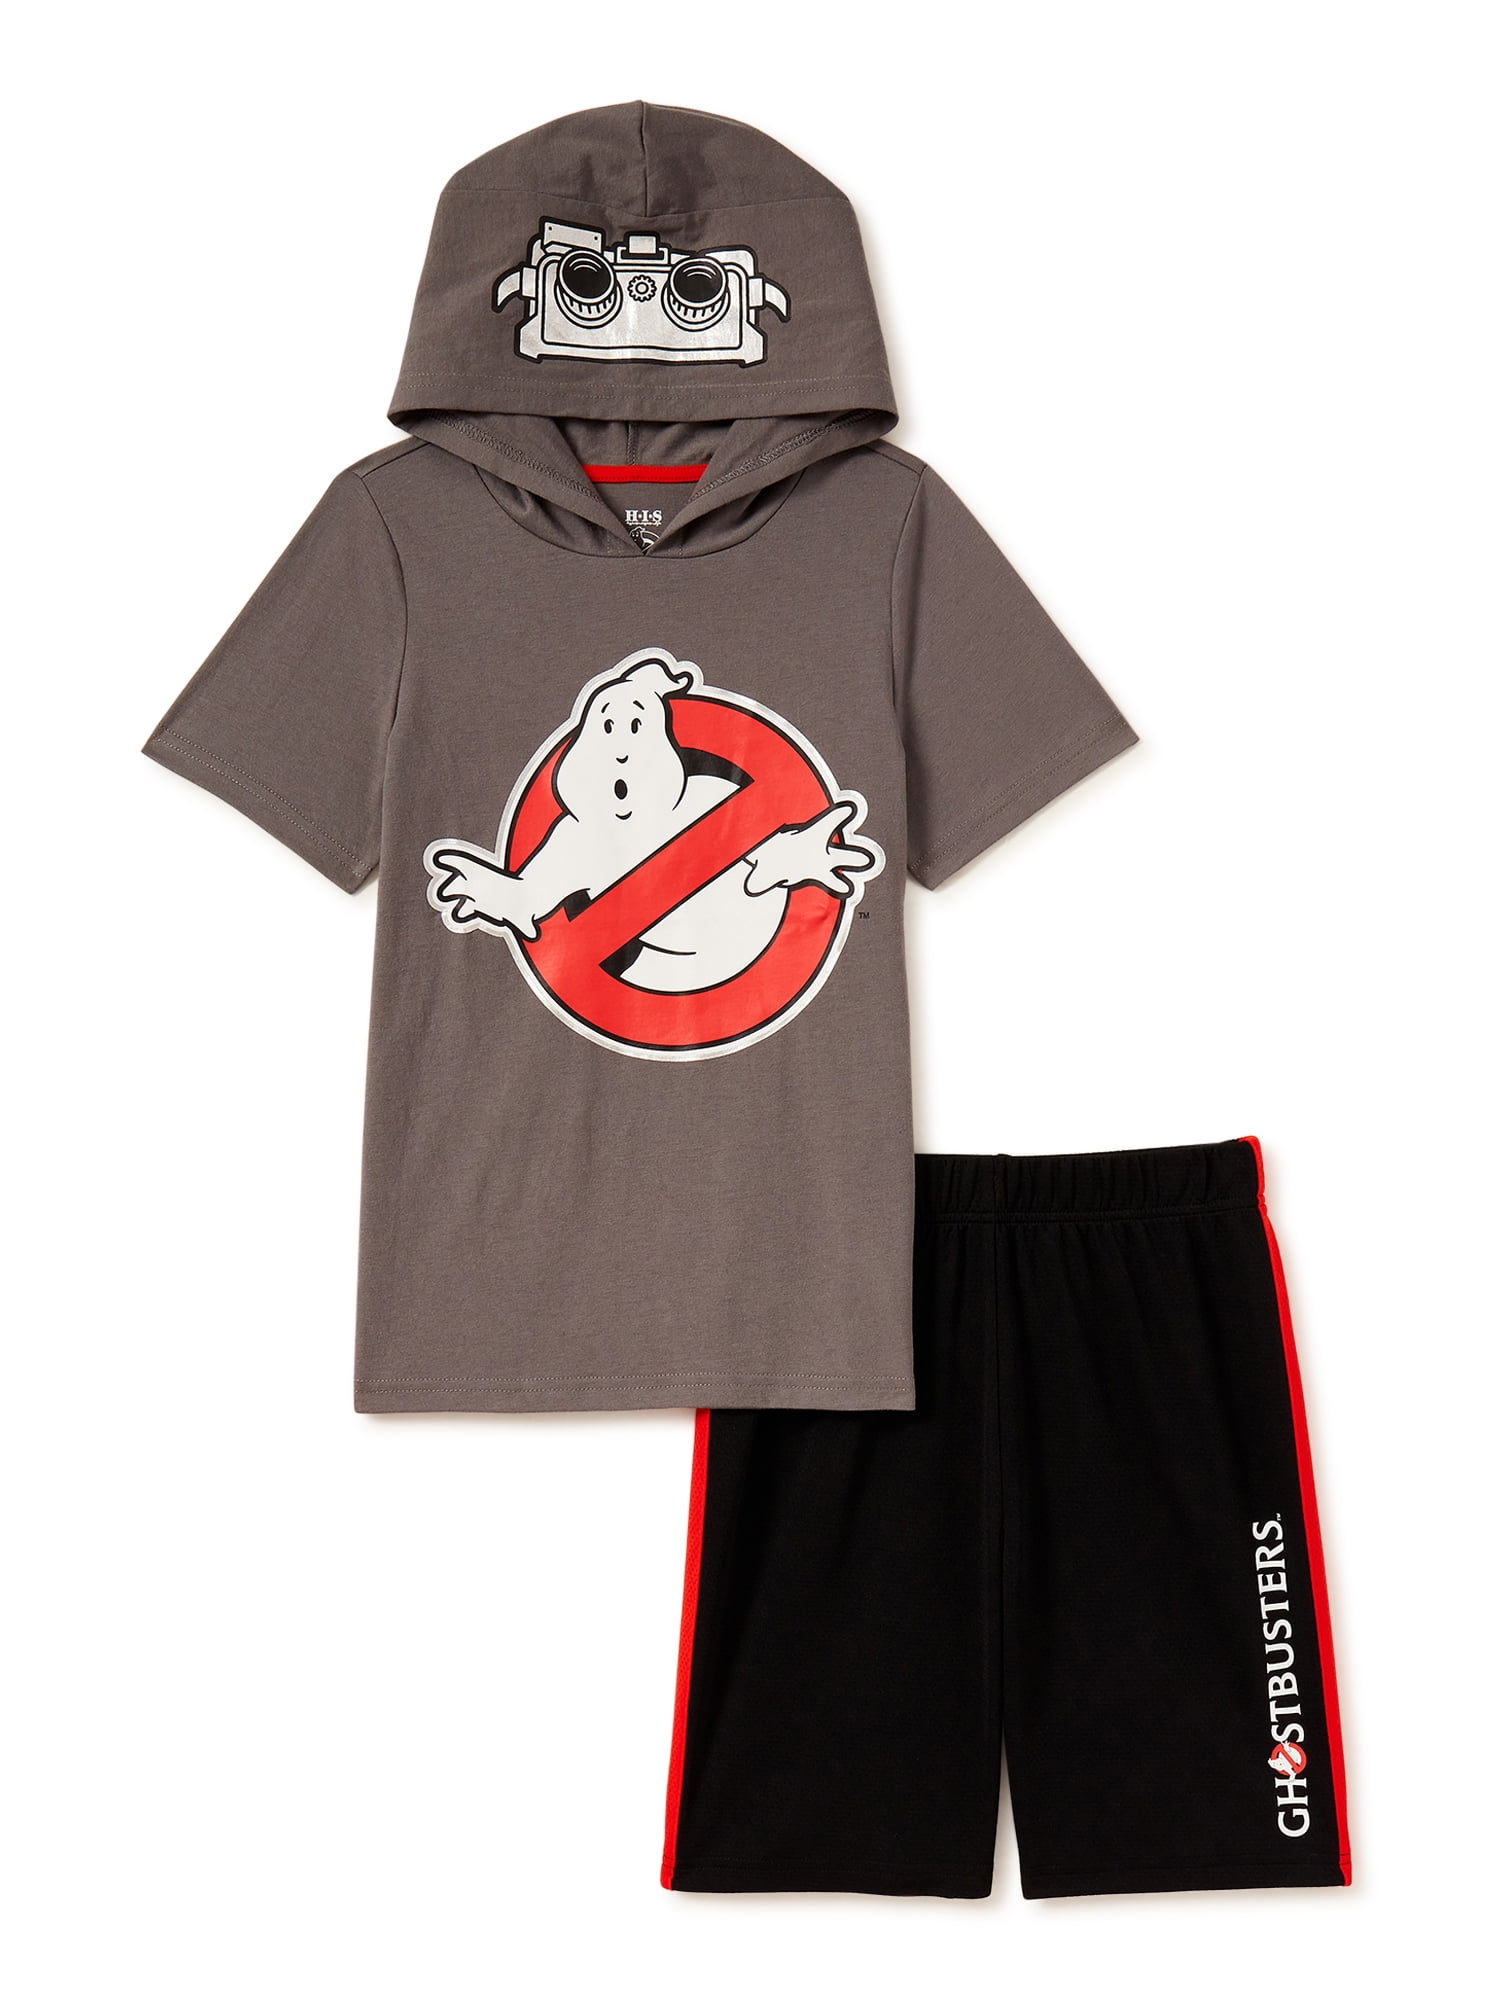 Goods Shops Ghostbuster Logo Womans Casual Beach Pants Swimming Vacation Surfing Shorts Gym Pants